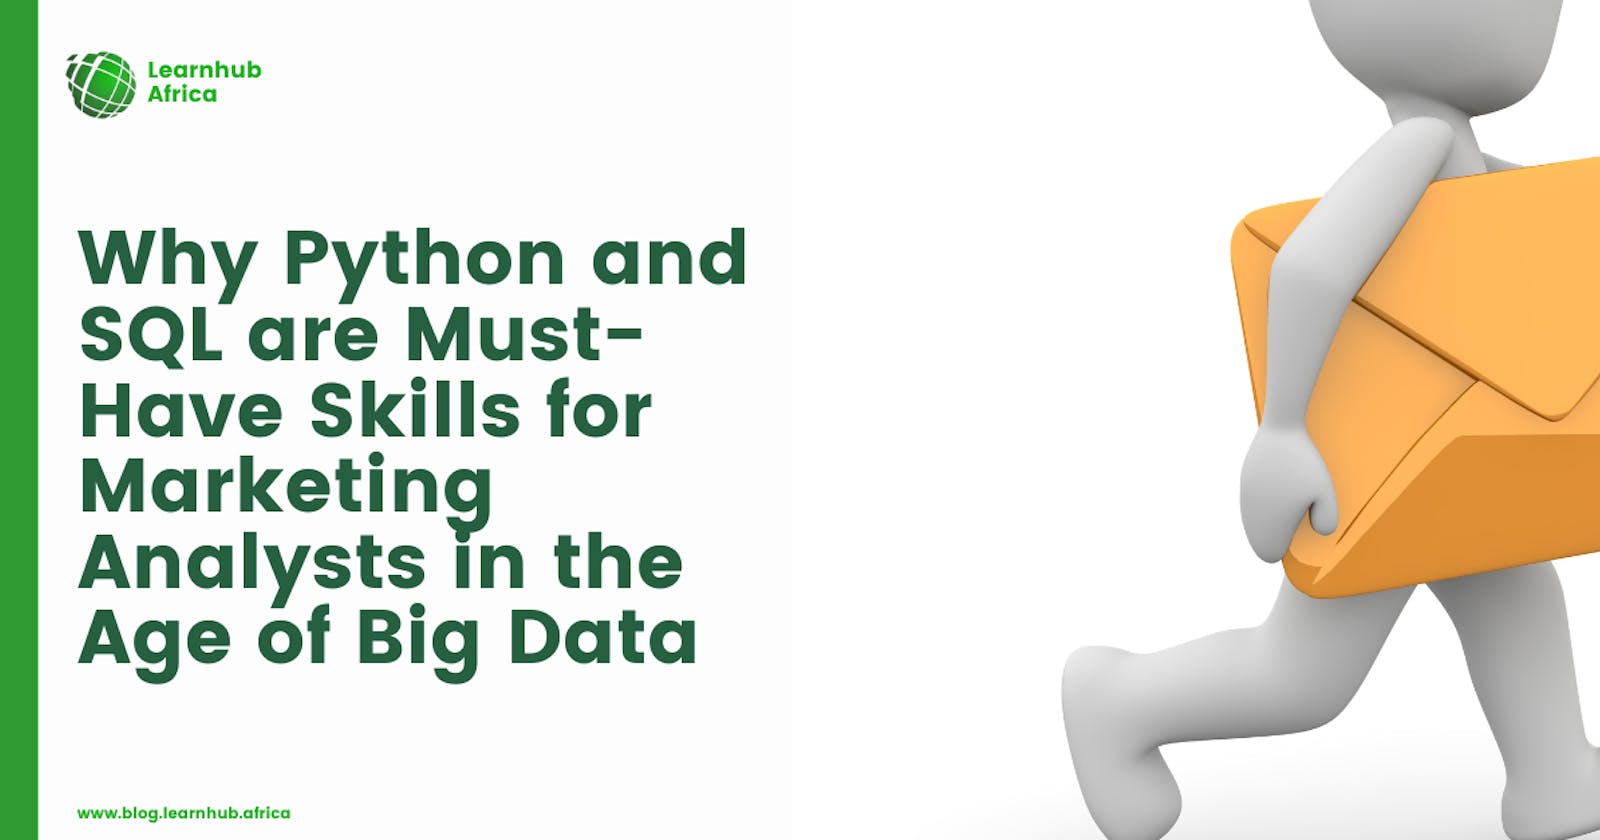 Why Python and SQL are Must-Have Skills for Marketing Analysts in the Age of Big Data